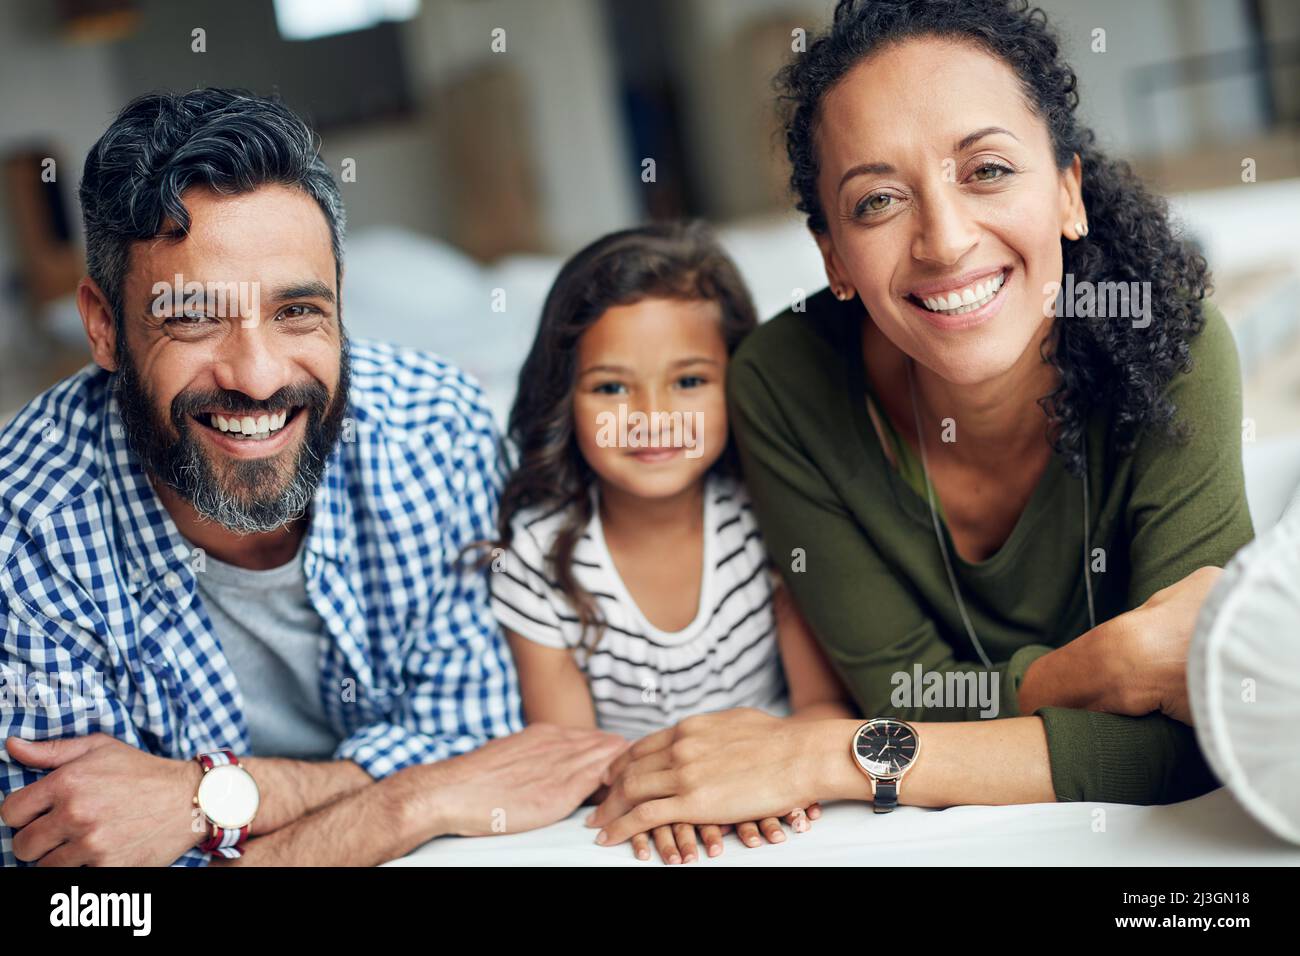 The best moments are shared as a family. Portrait of a happy family bonding together at home. Stock Photo